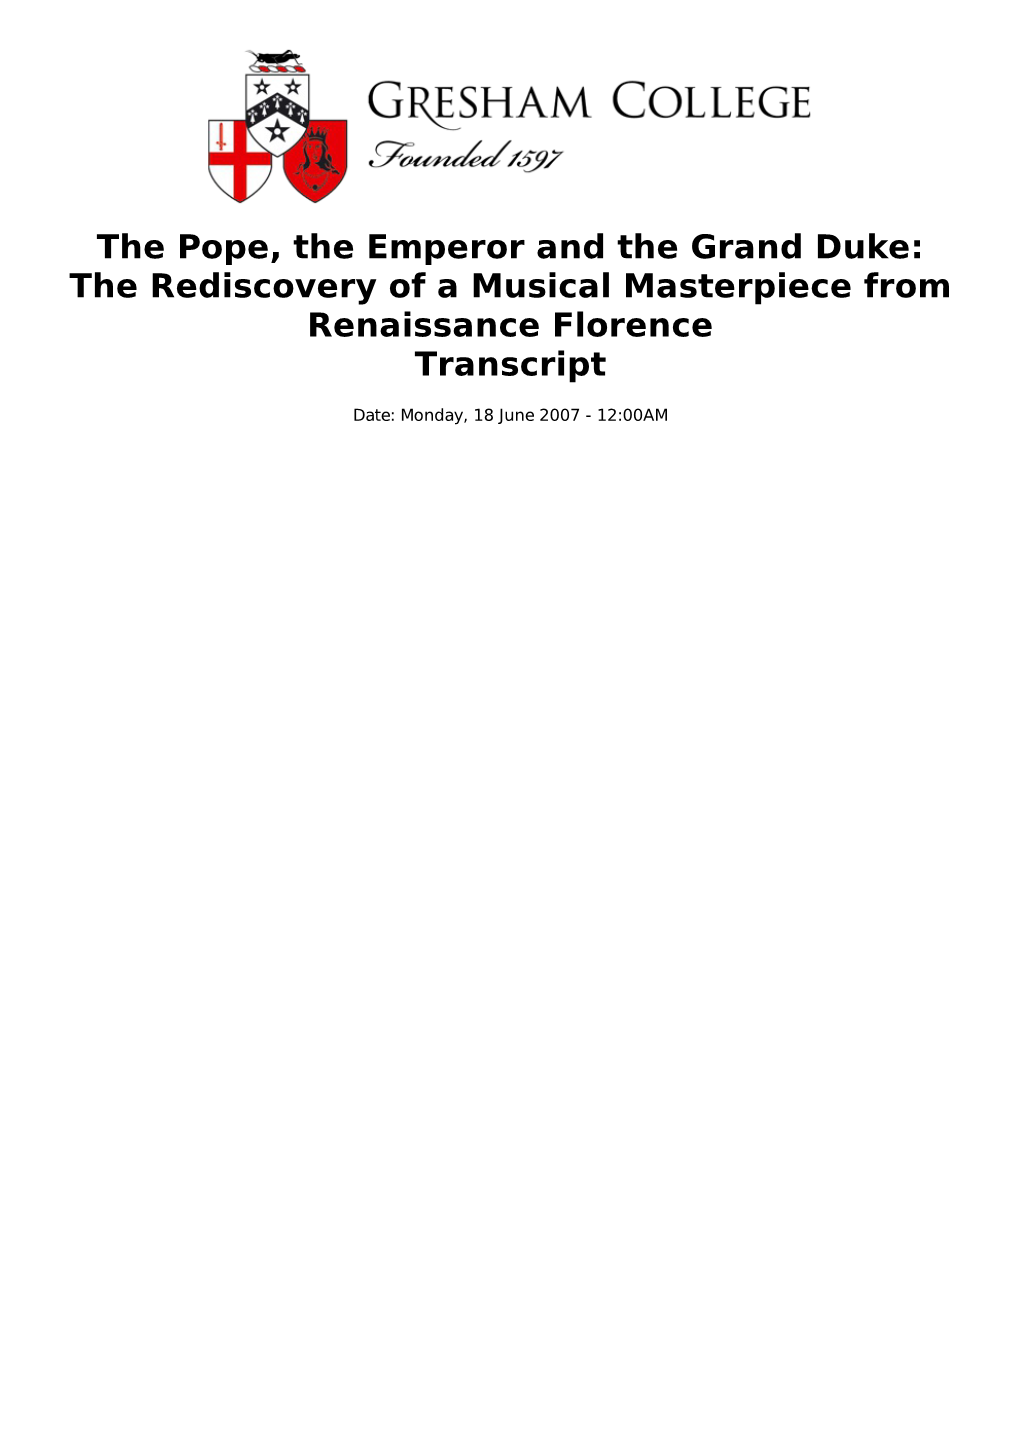 The Pope, the Emperor and the Grand Duke: the Rediscovery of a Musical Masterpiece from Renaissance Florence Transcript